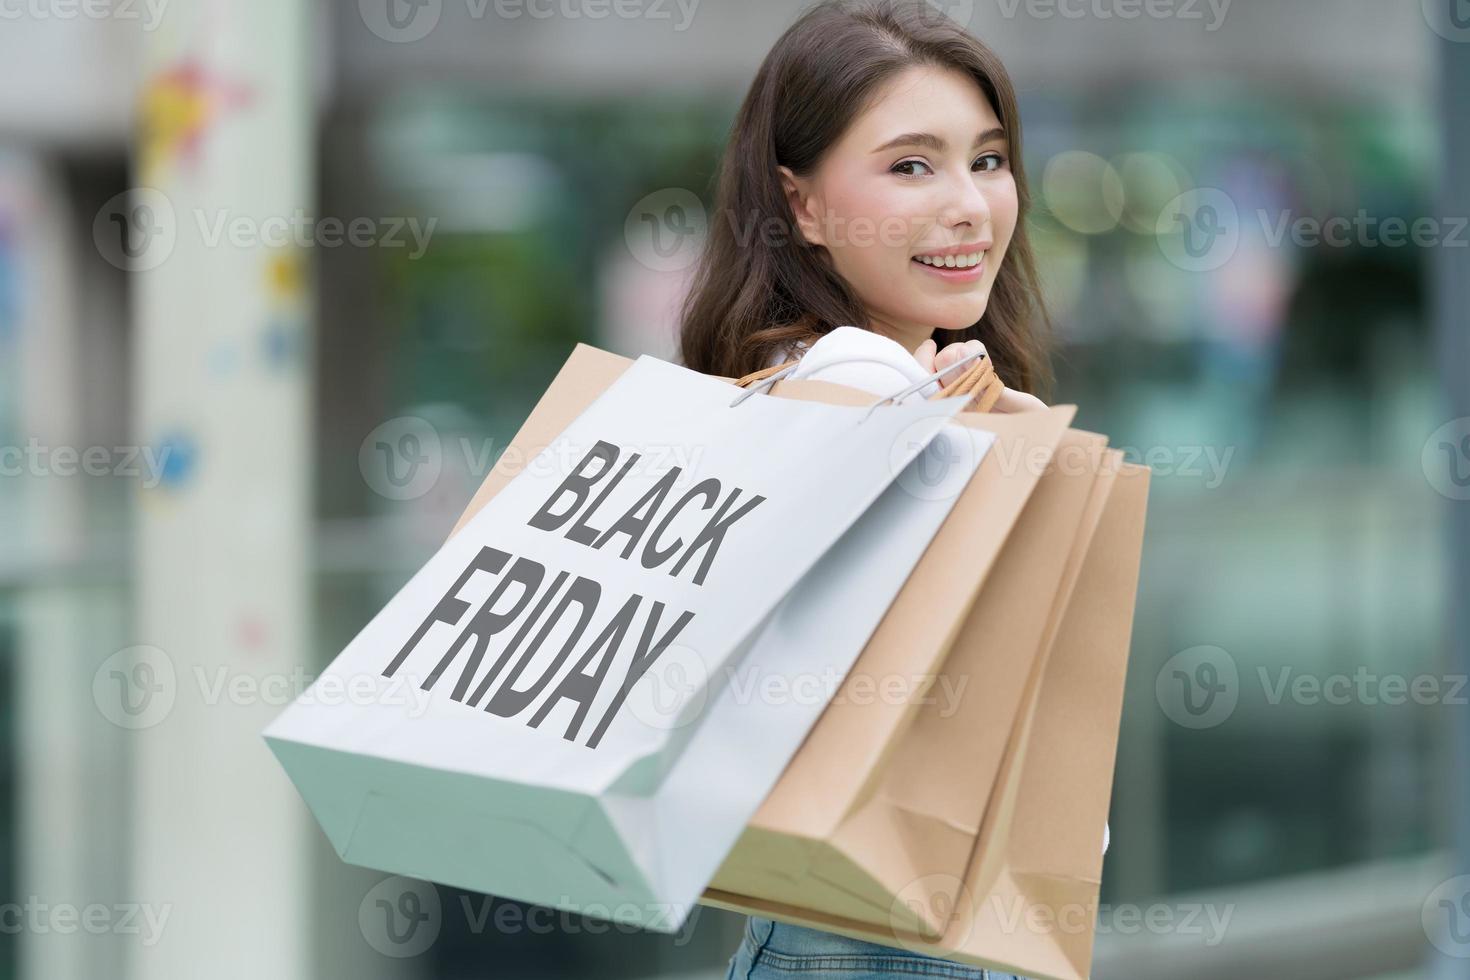 Black Friday concept, Woman holding many shopping bags and smiling in the store during shopping process photo